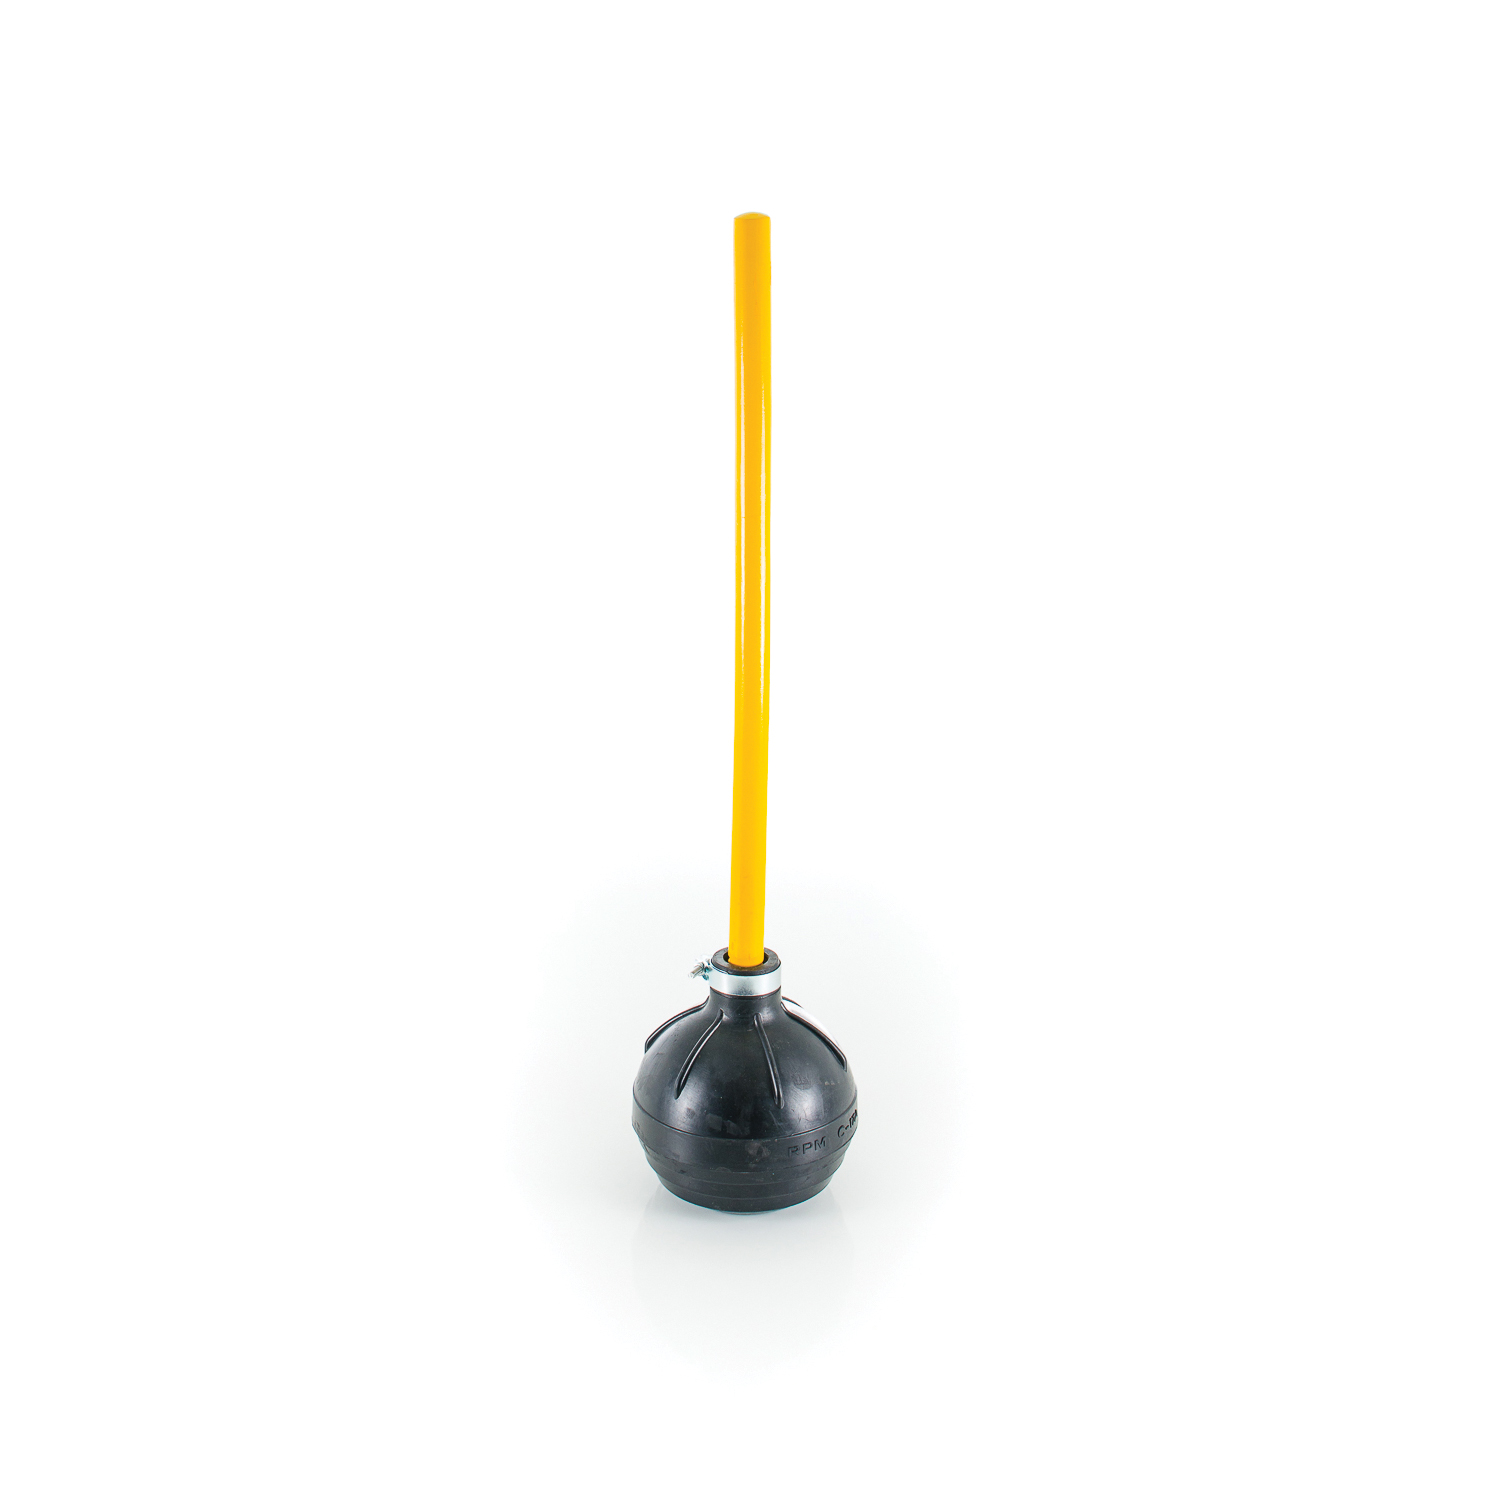 PASCO 4637 Heavy Duty Closet Bowl Force Cup, 19 in Handle, High Quality Rubber Plunger, Black